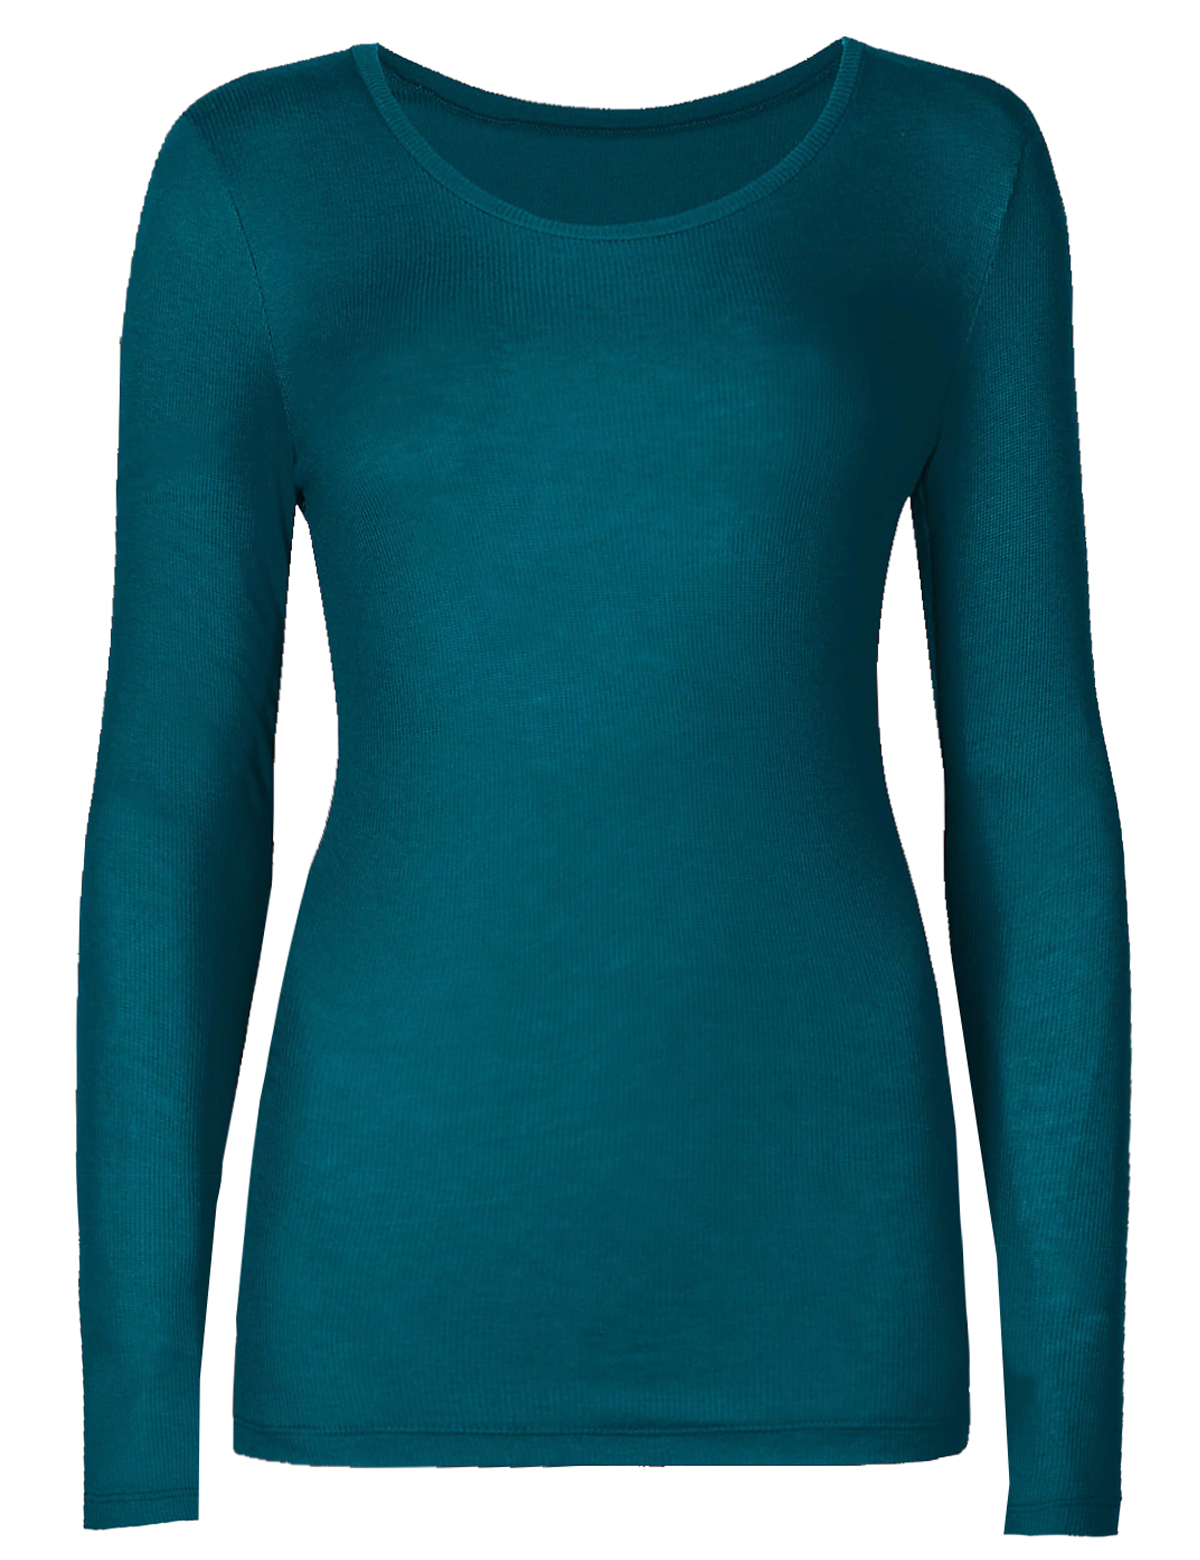 Marks and Spencer - - M&5 DARK-TURQUOISE Ribbed Heatgen Thermal Long ...